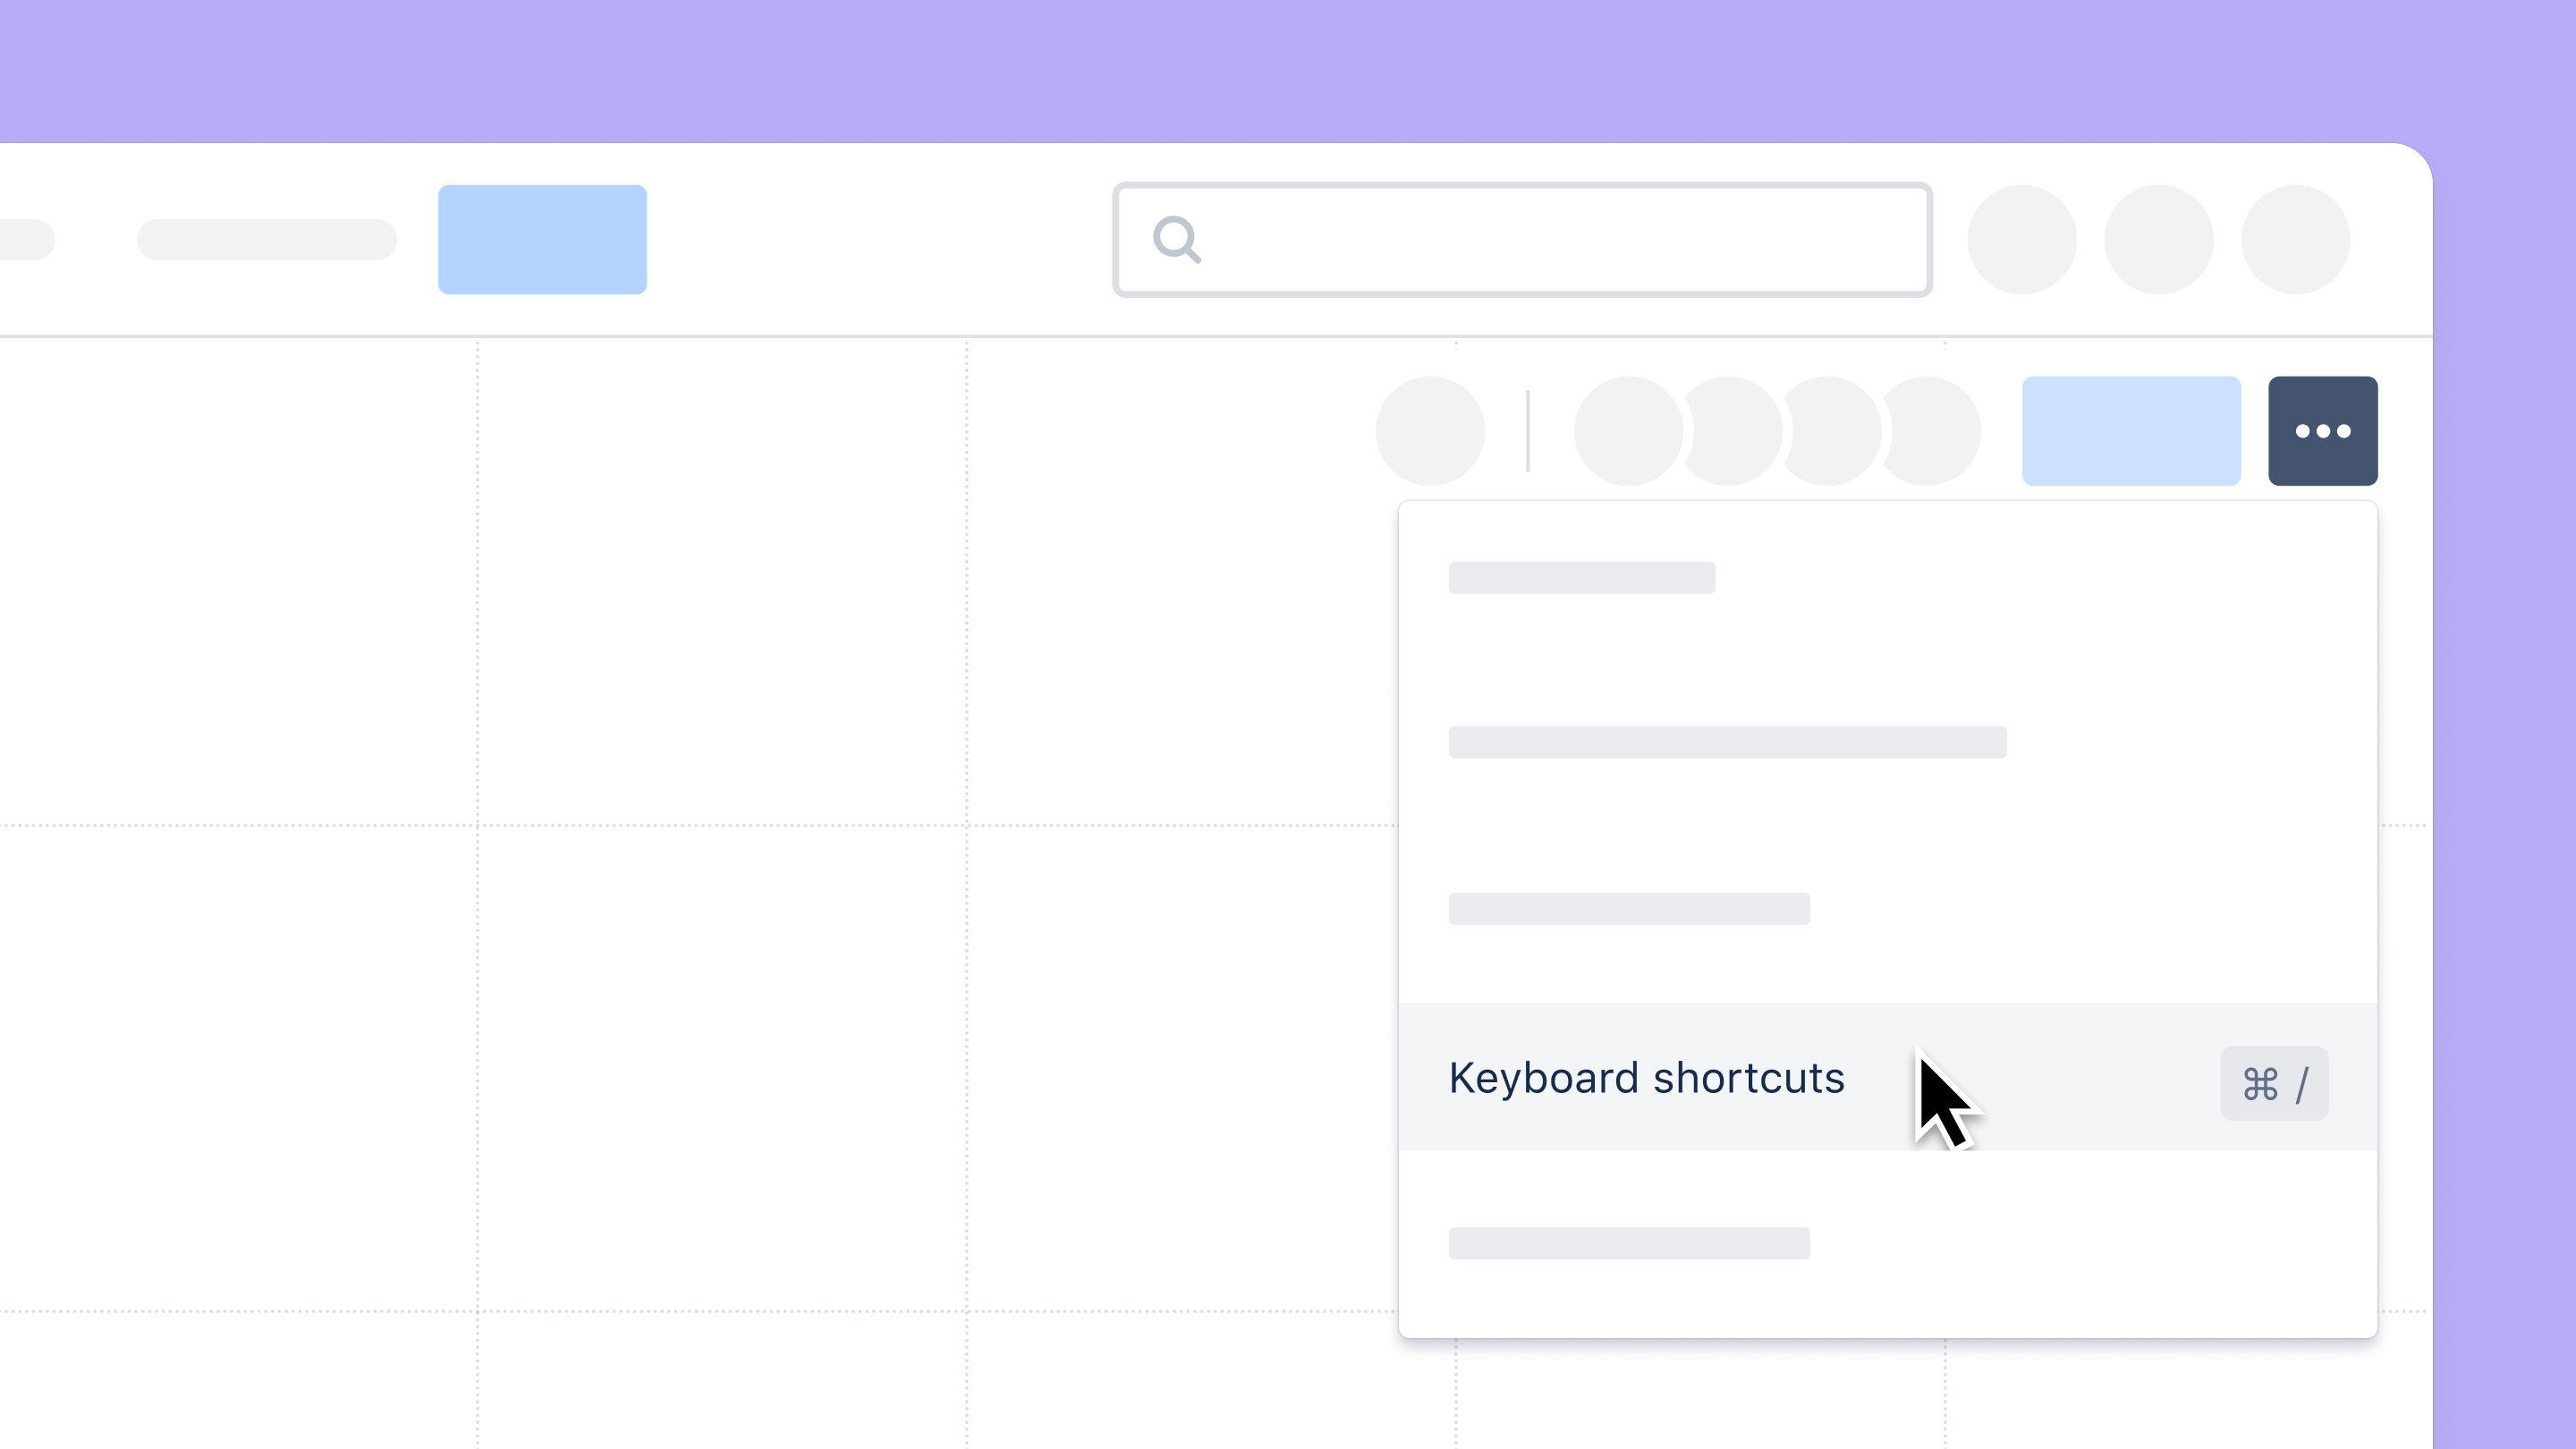 Selecting the keyboard shortcuts menu option from the whiteboards menu